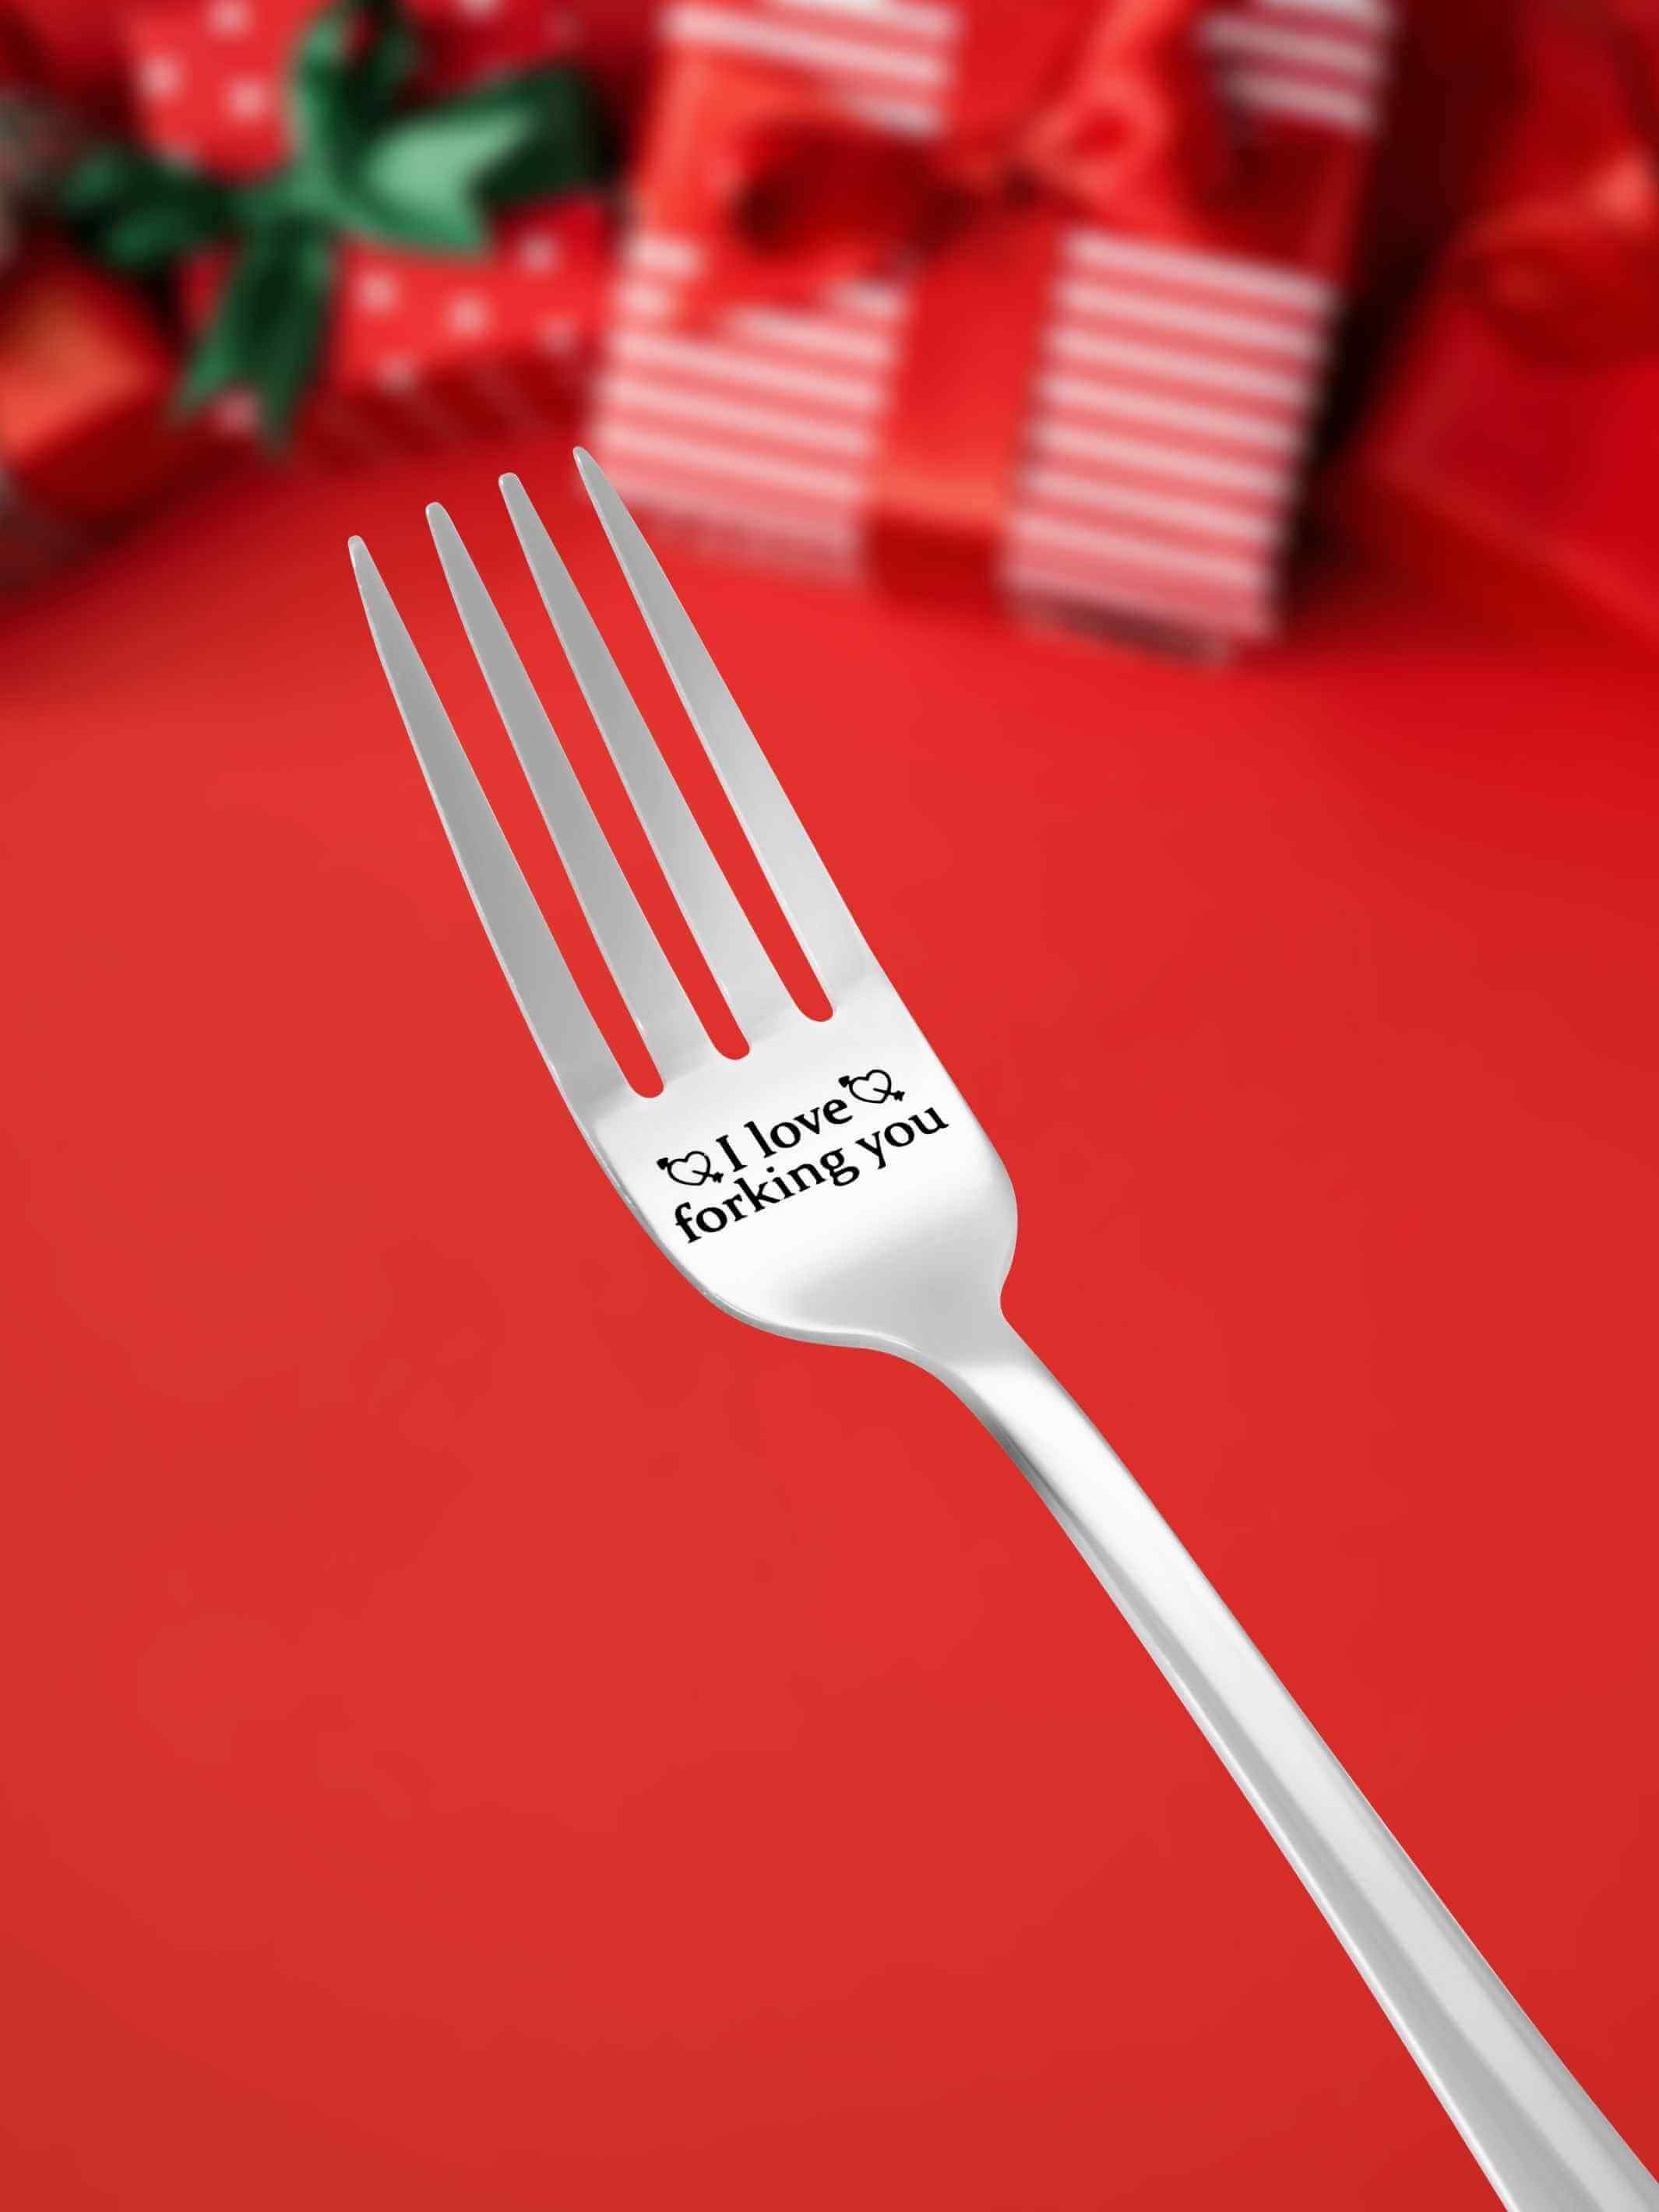 funny gift for boyfriend girlfriend I forking love You Valetines day gift 2022 engraved forks set personalized cutlery for him her